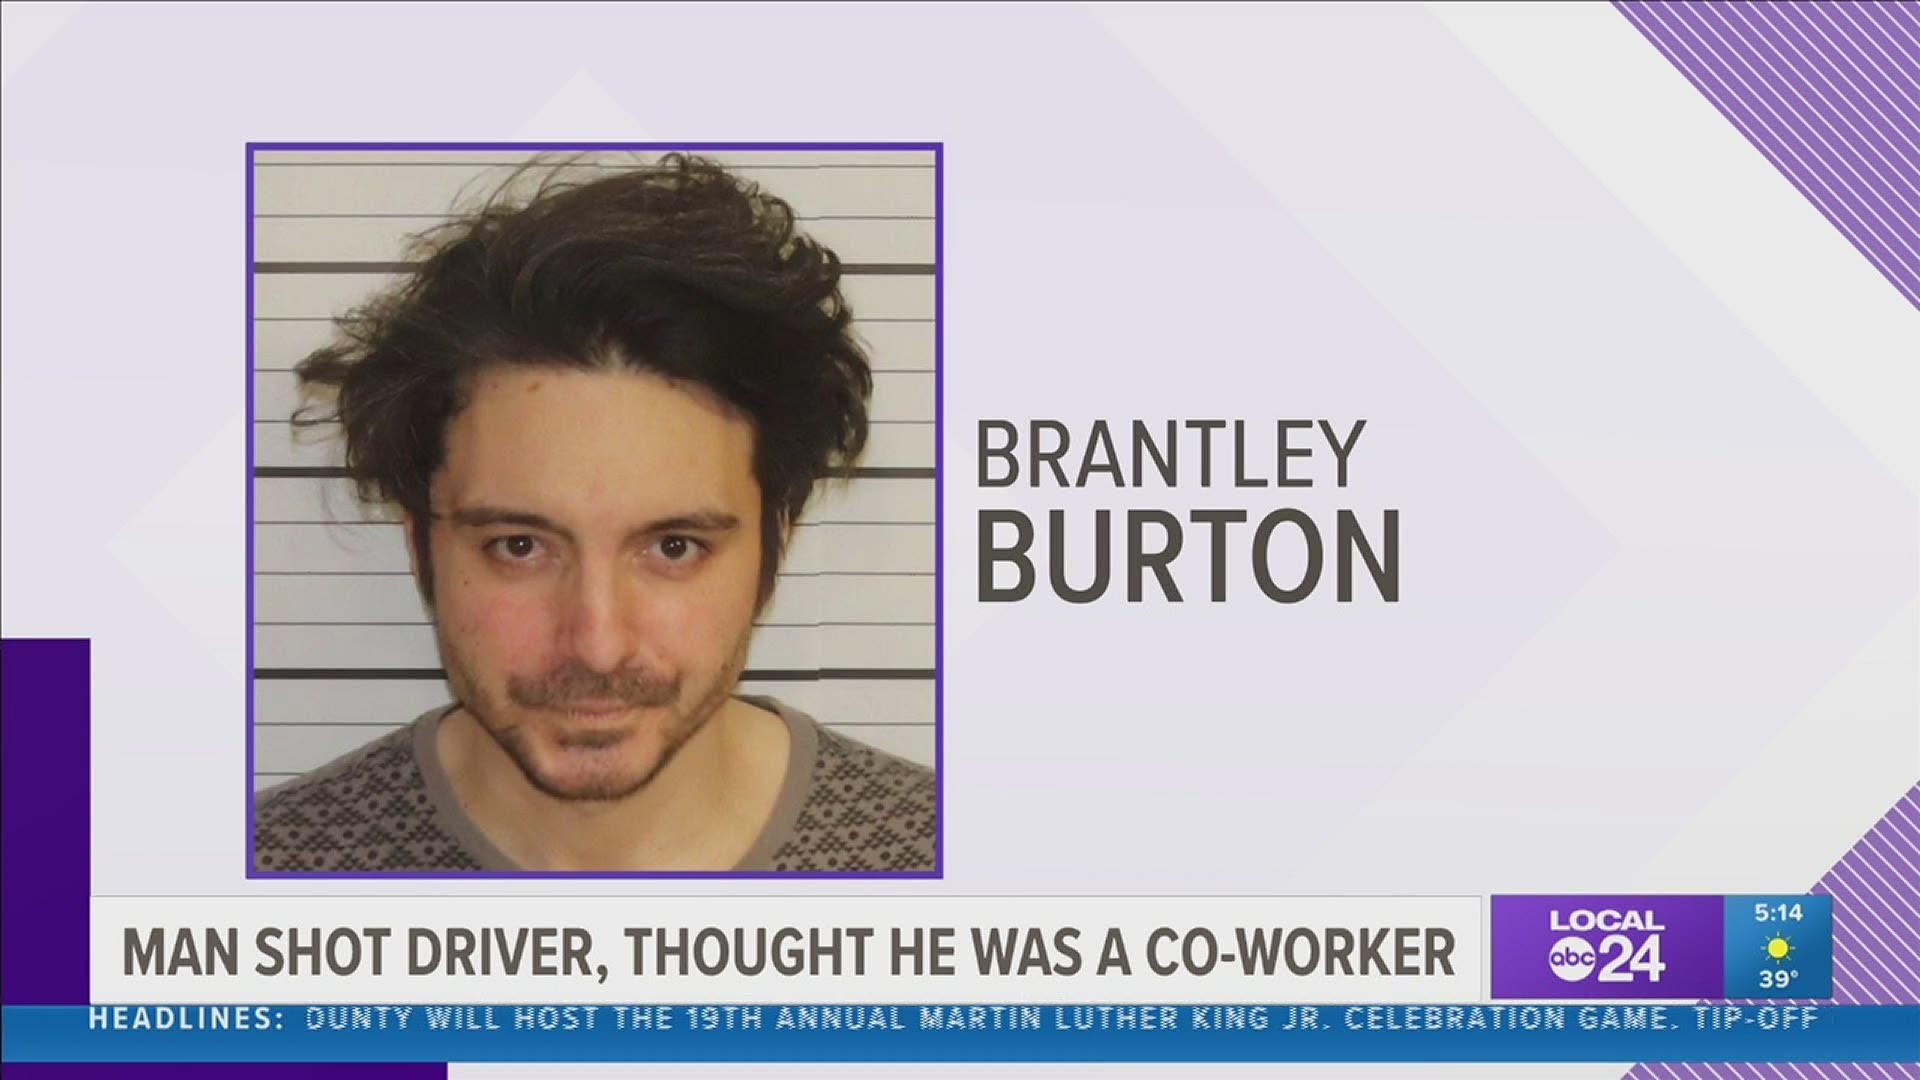 Deputies said 32-year-old Brantley Burton told them someone was after him following a “work-related incident.”